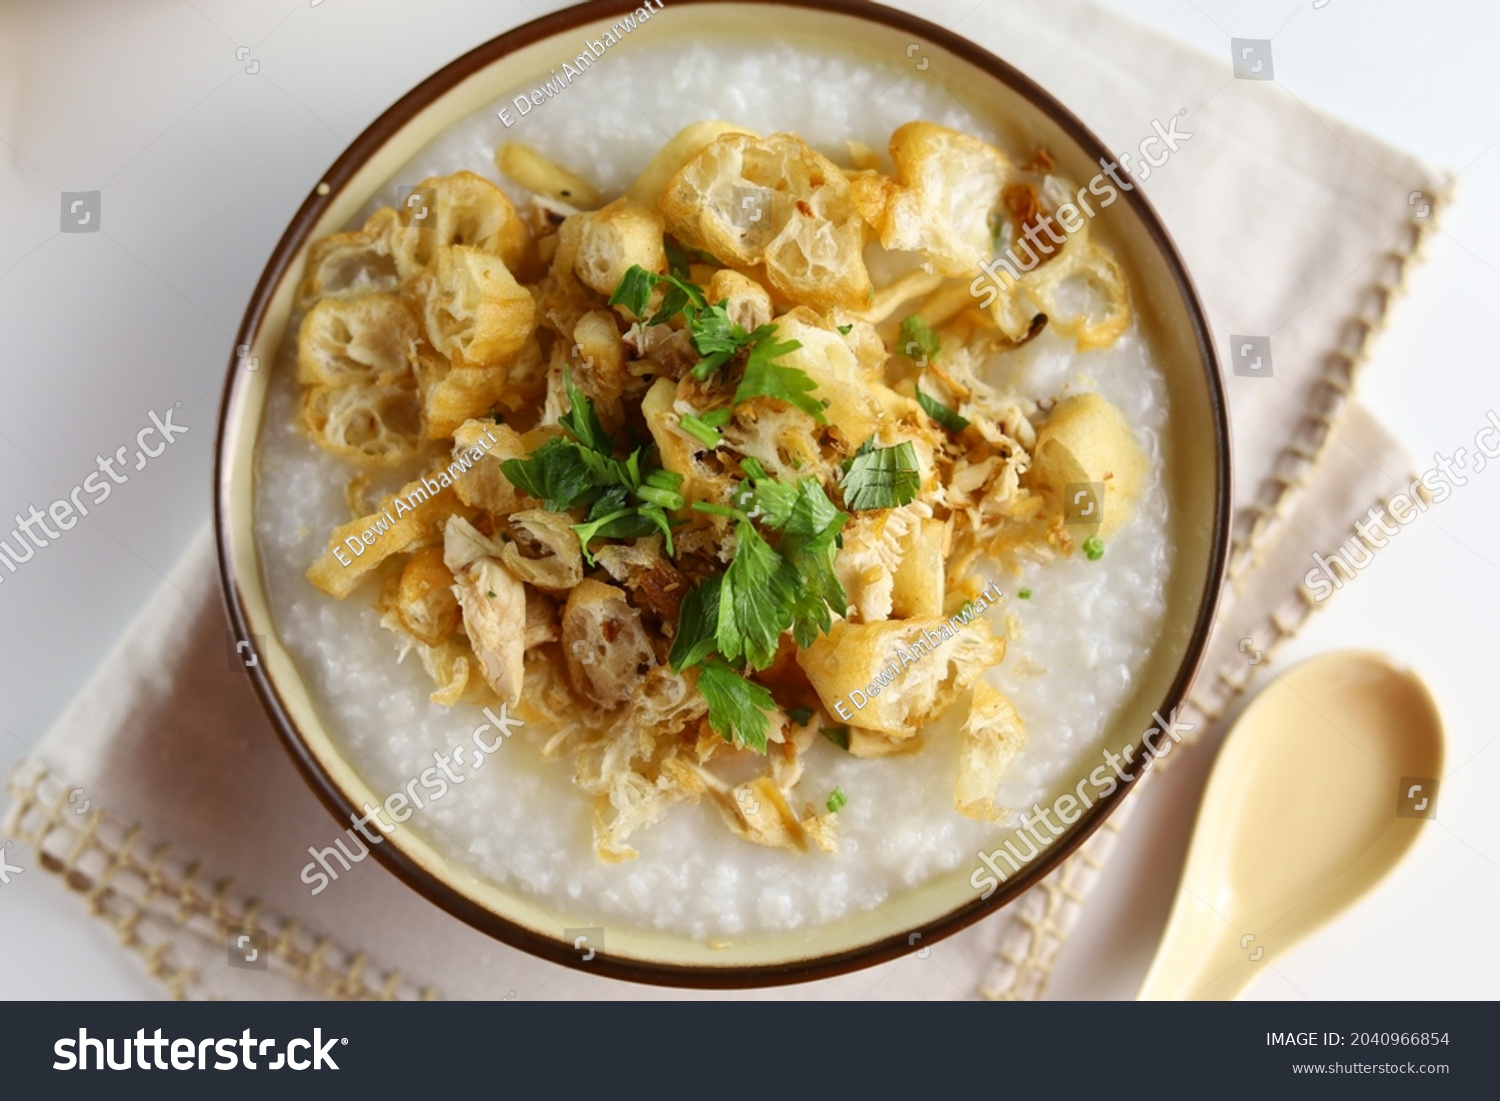 Bubur Ayam or Indonesian Rice Porridge with Shredded Chicken, cheese stick and cakwe. Top view #2040966854